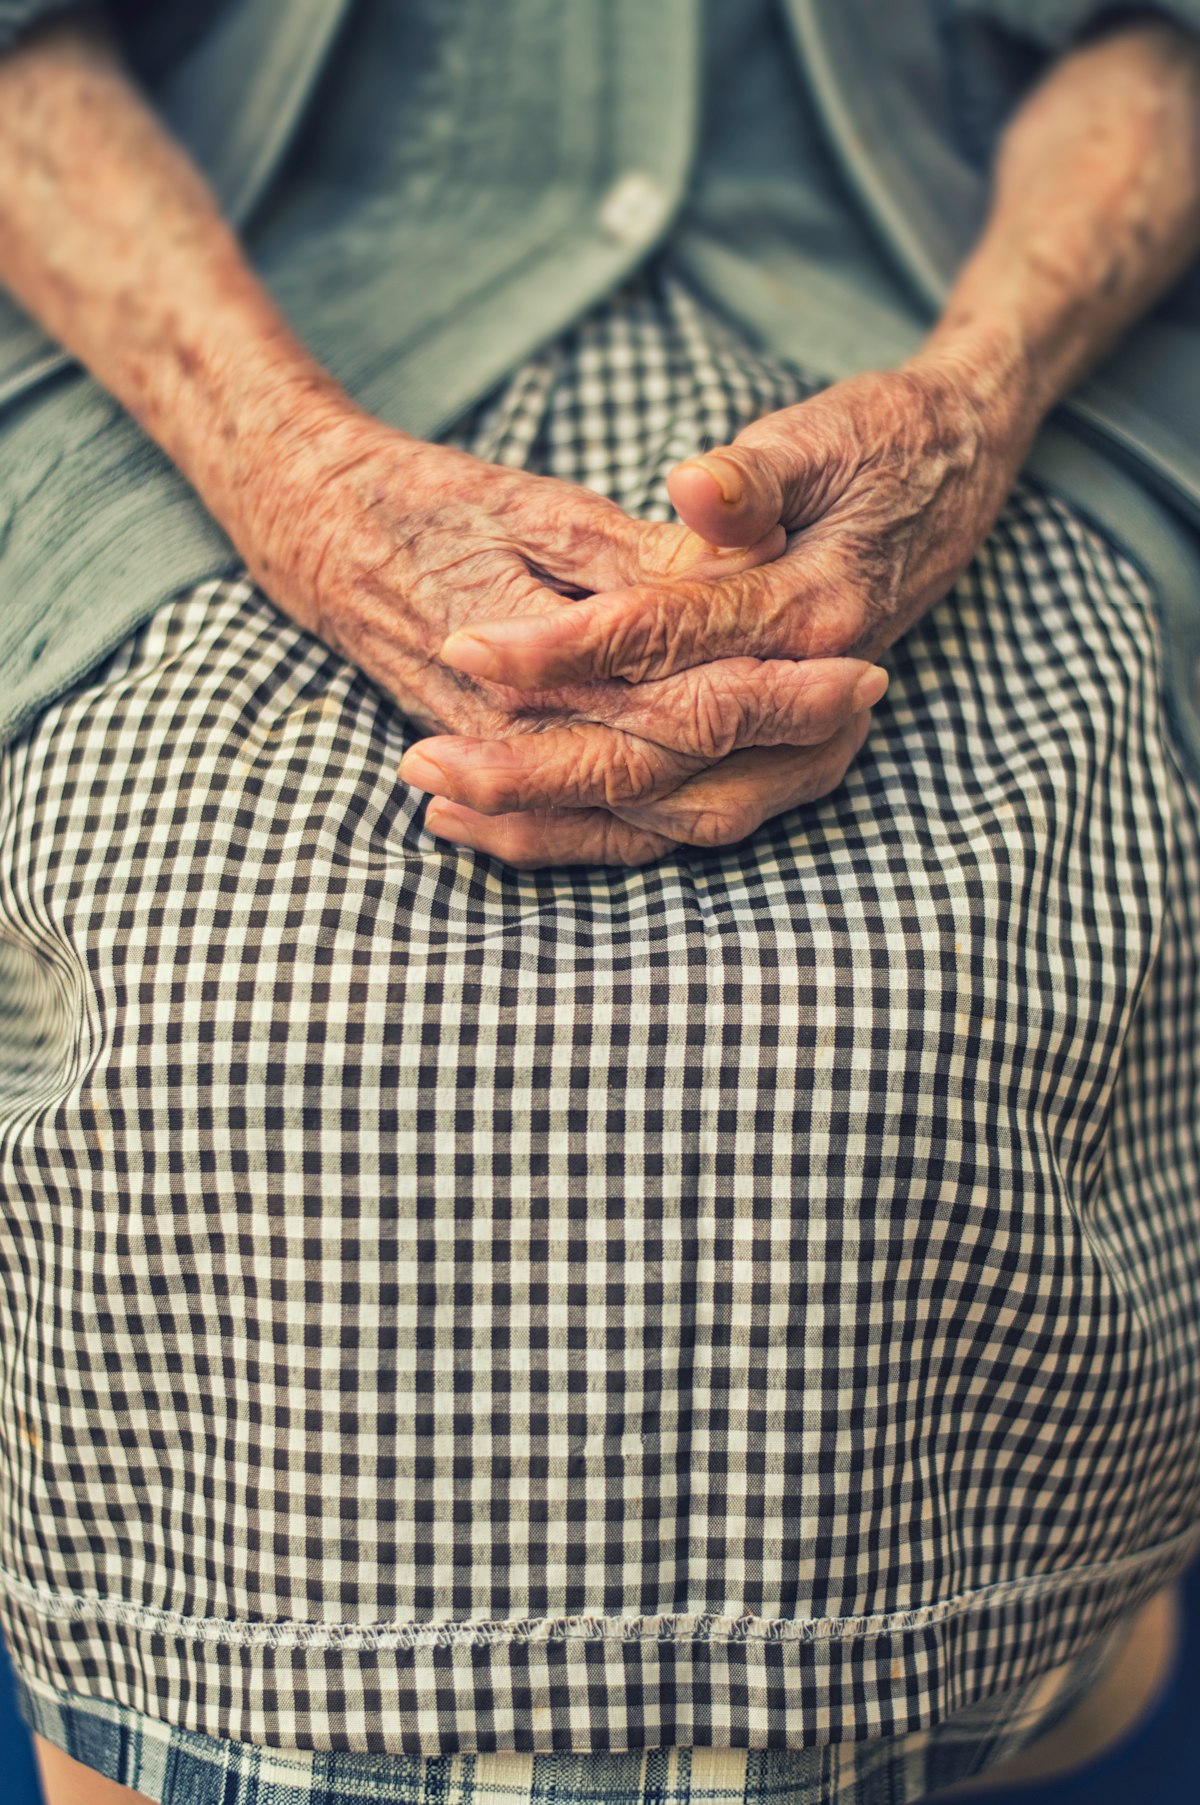 Elder Abuse : Adult Protective Services is Not Helping